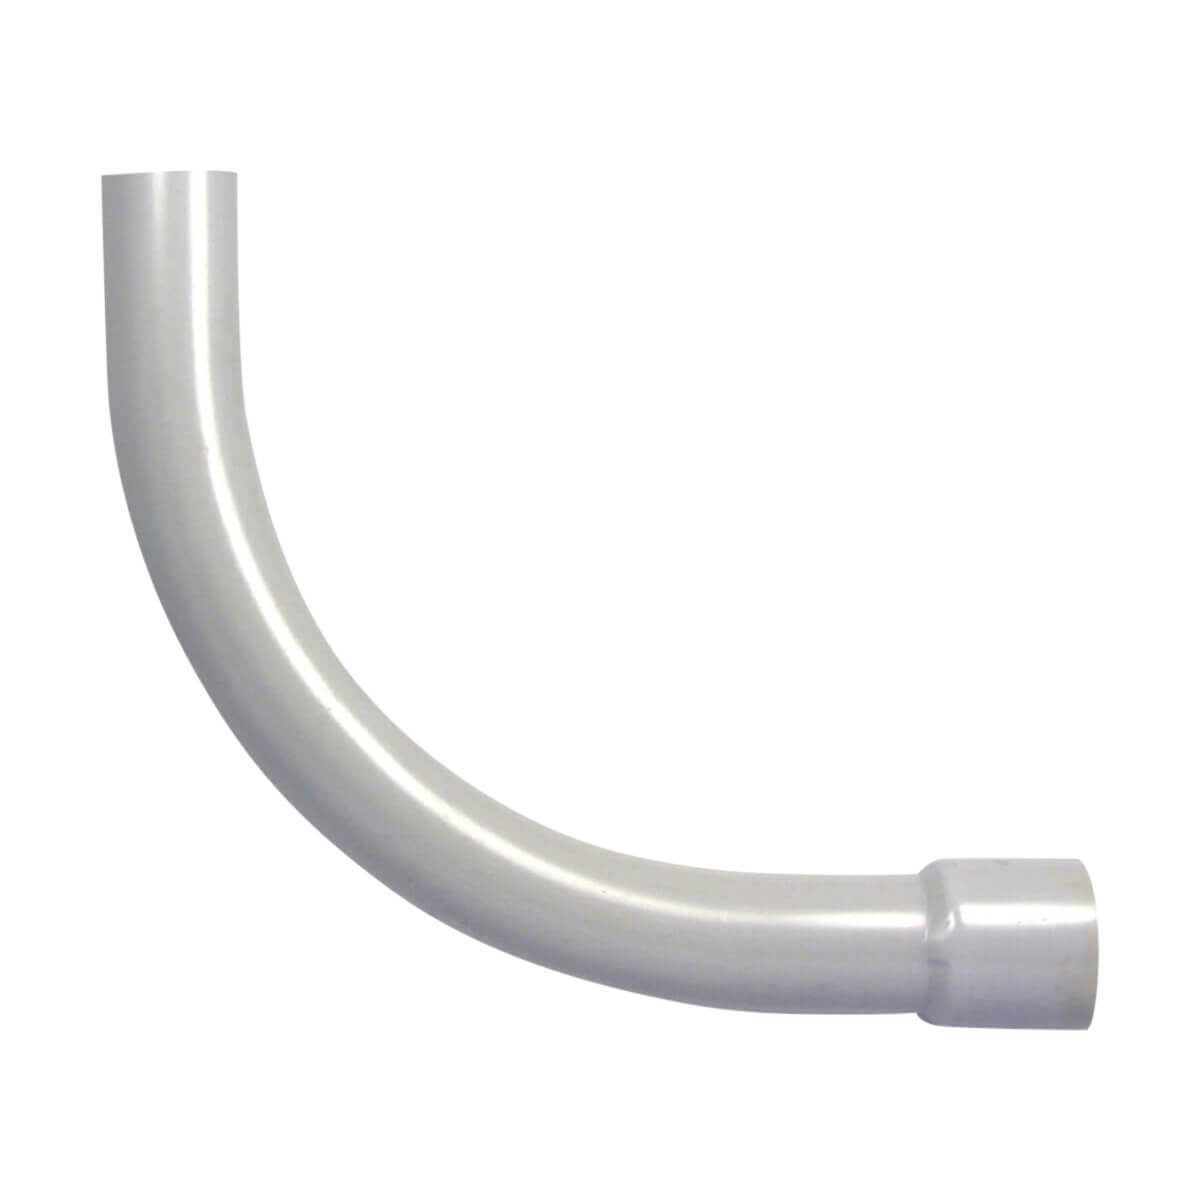 PVC Conduit 90° Elbow - Bell-end - 2-in